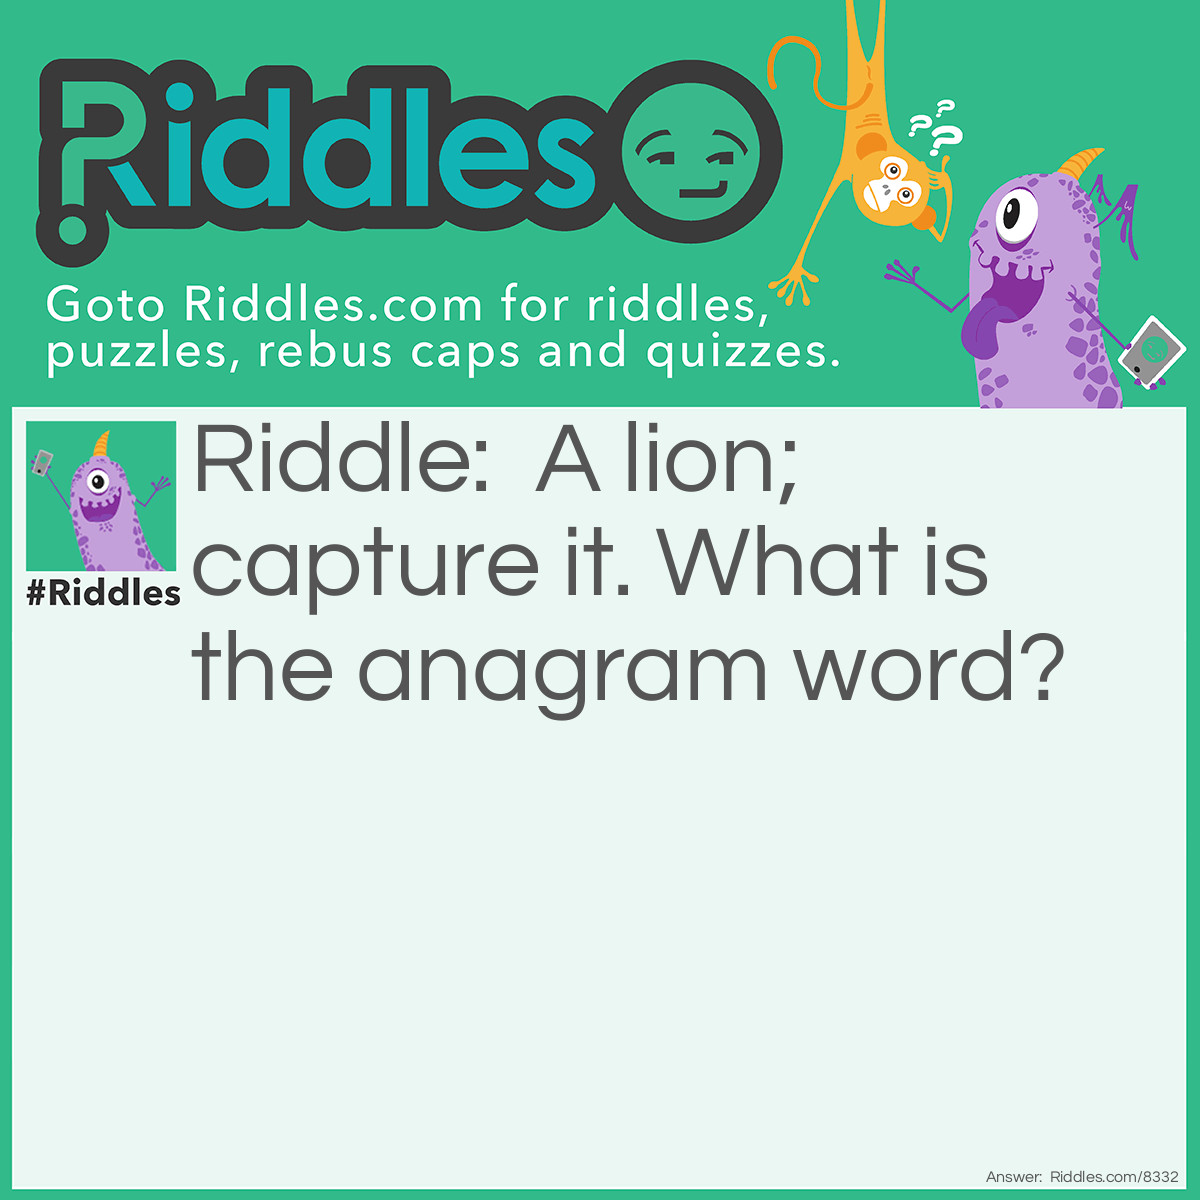 Riddle: A lion; capture it. What is the anagrammed word? Answer: Recapitulation.